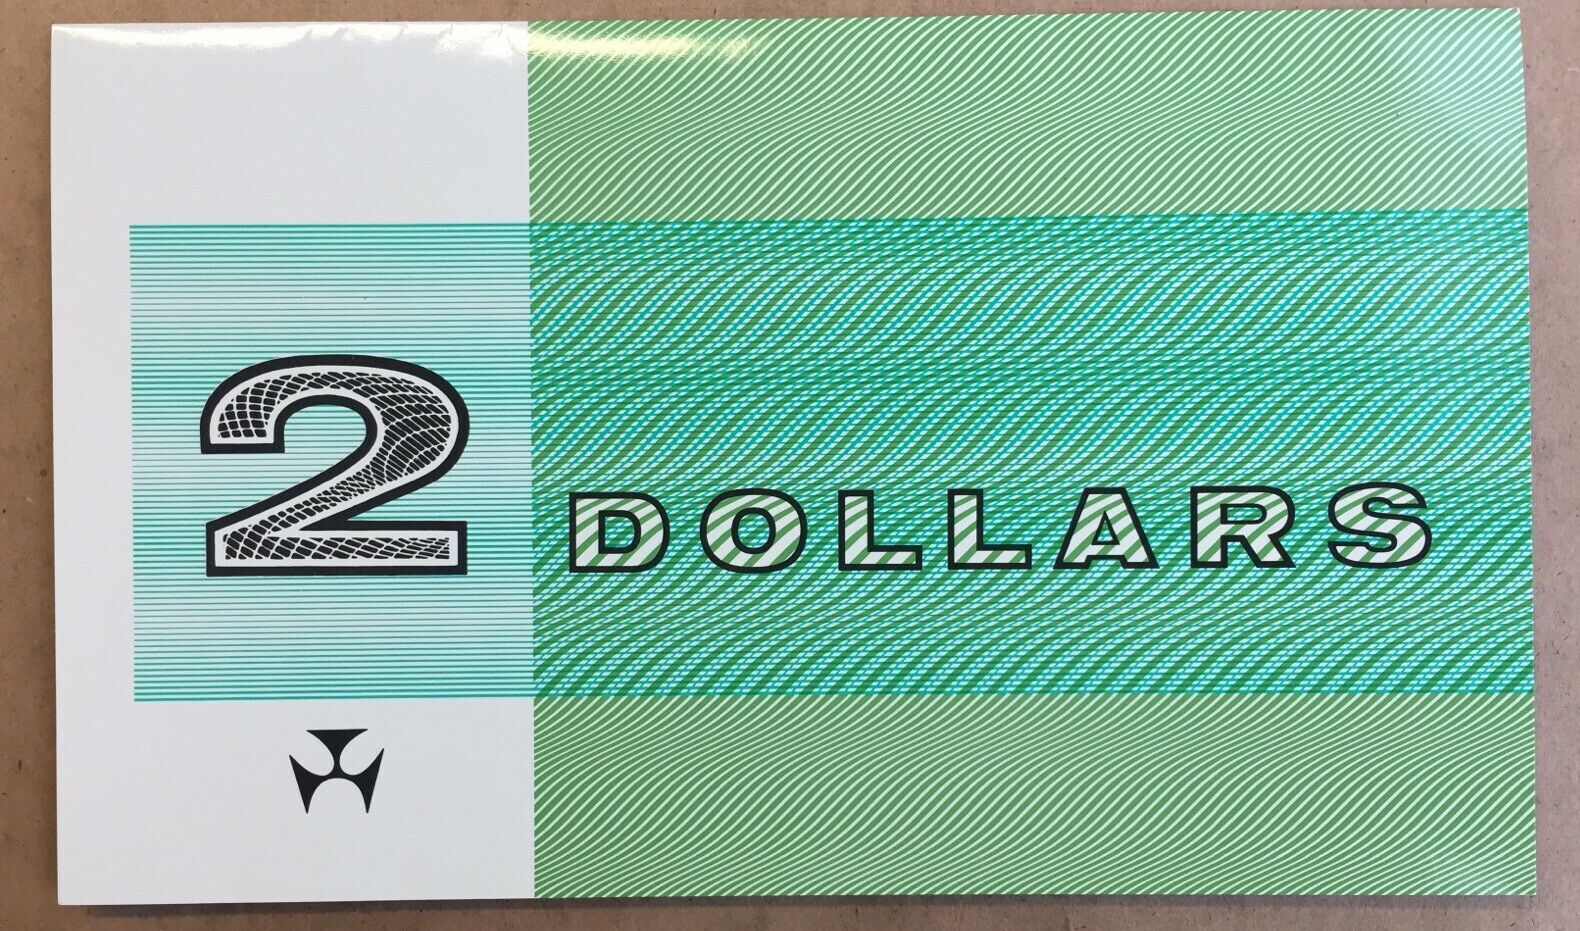 The $2 Two Dollar Collector Folder